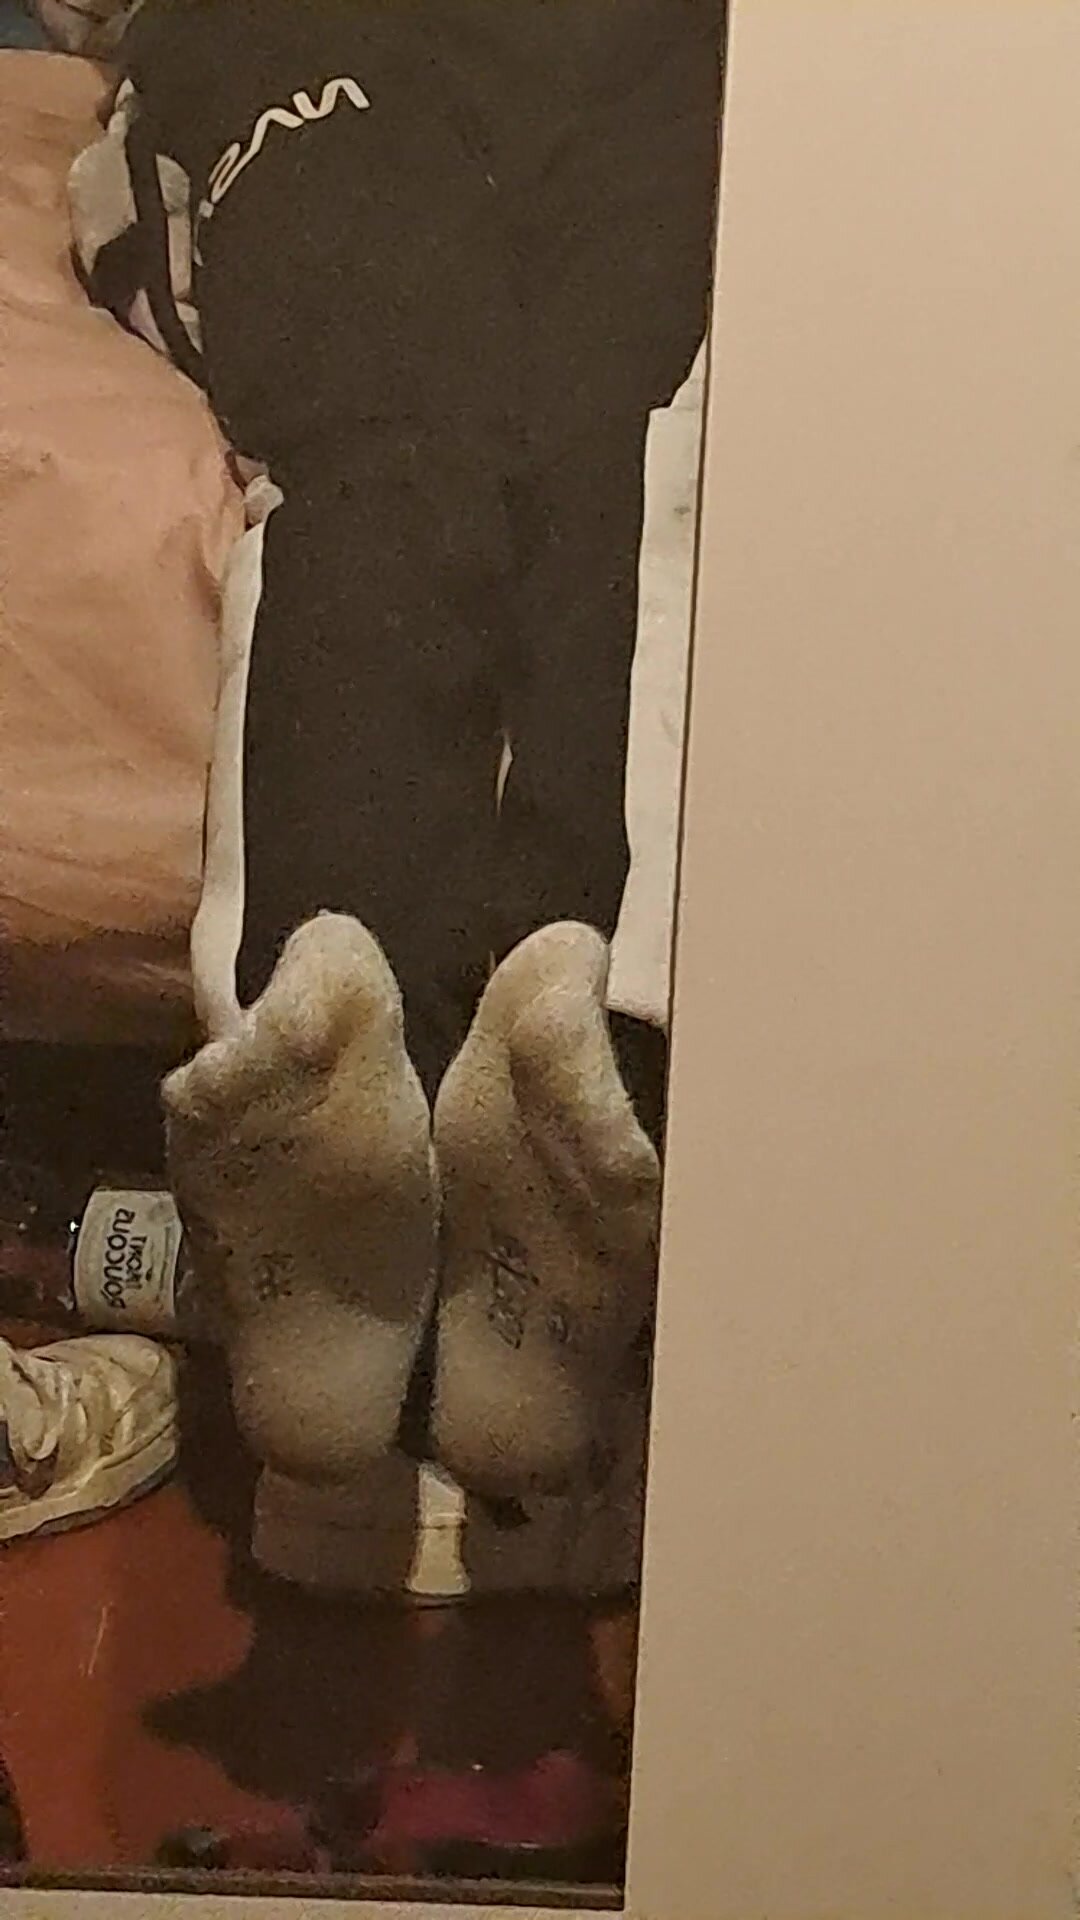 My dirty teen socks after gym